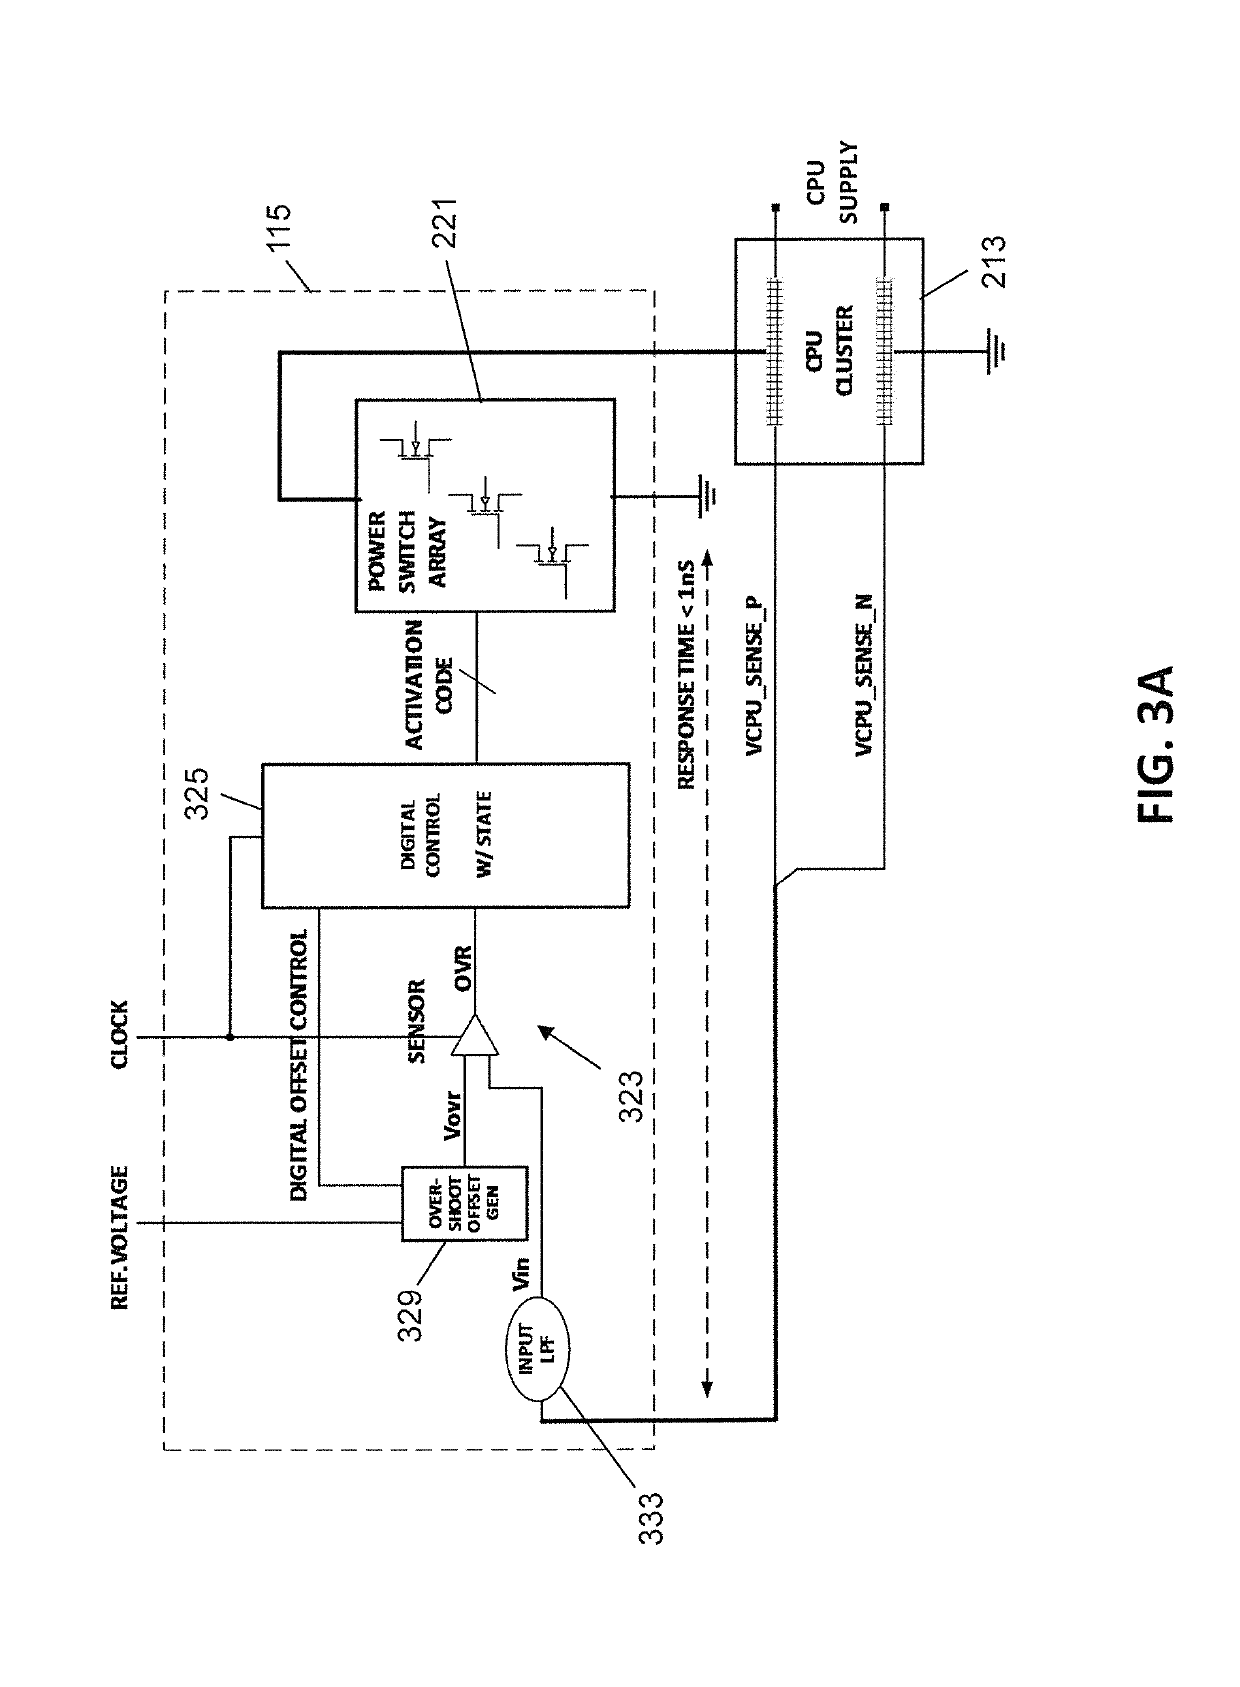 Method and apparatus for improving integrity of processor voltage supply with overshoot mitigation and support for dvfs